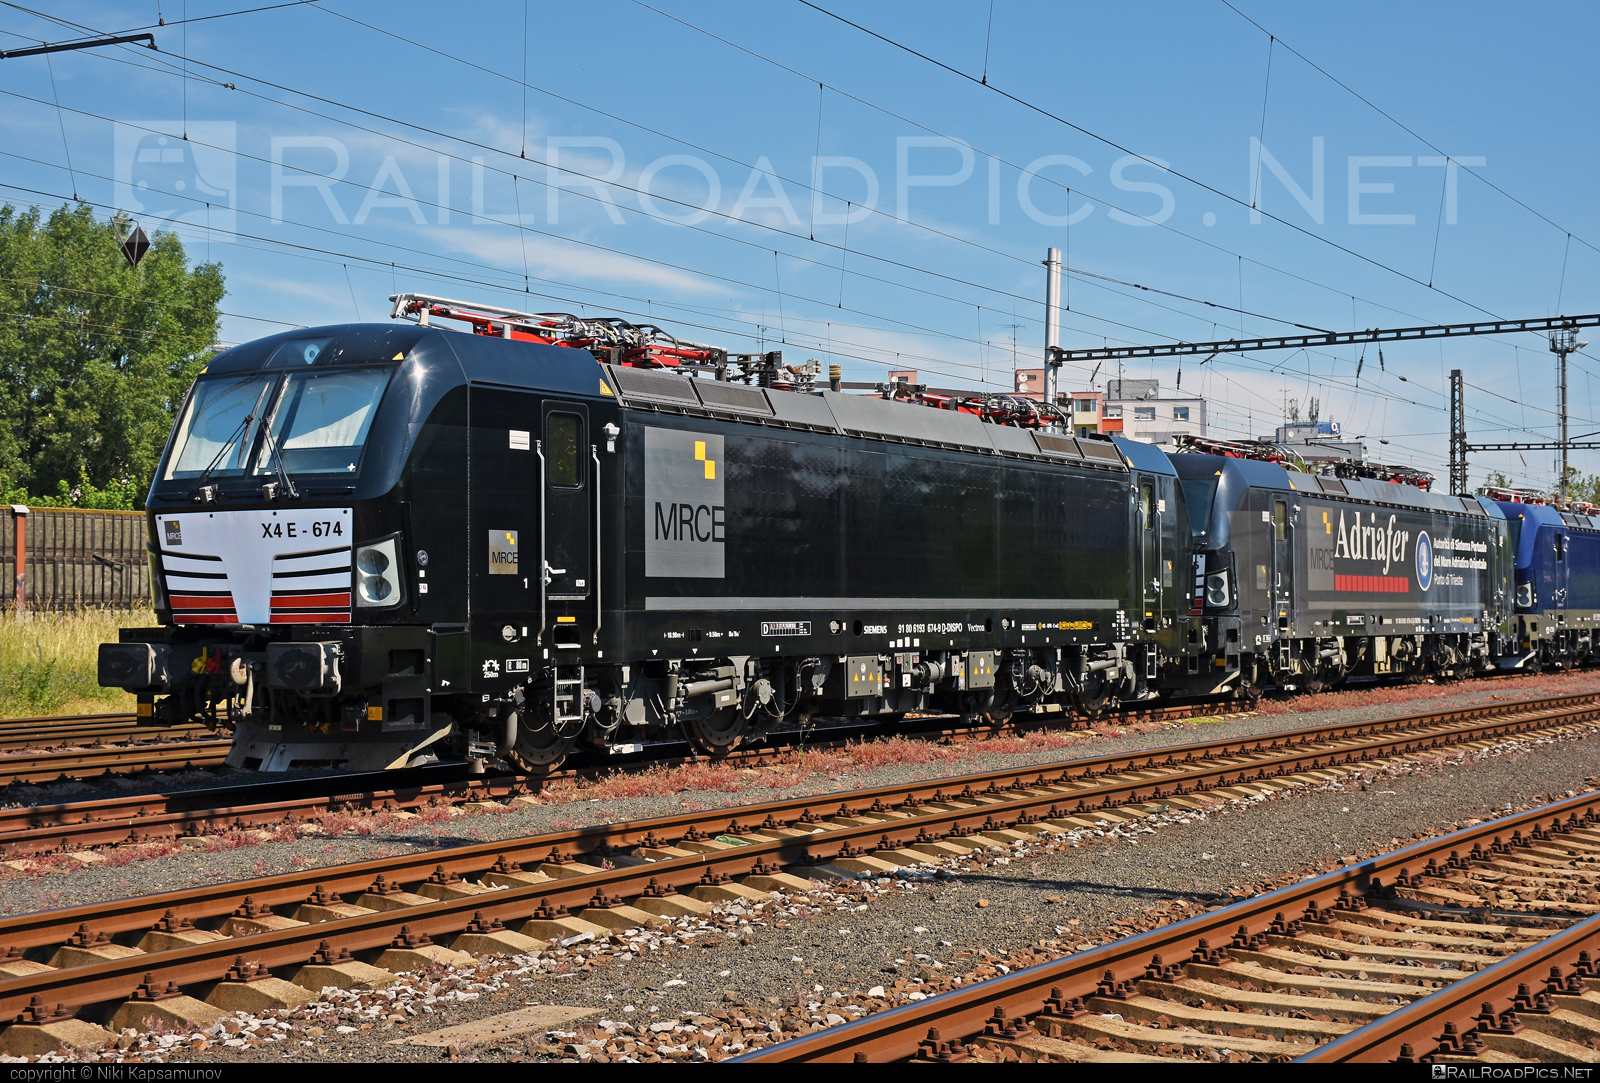 Siemens Vectron MS - 193 674-9 operated by ADRIAFER S.R.L. #adriafer #dispolok #mitsuirailcapitaleurope #mitsuirailcapitaleuropegmbh #mrce #siemens #siemensvectron #siemensvectronms #vectron #vectronms